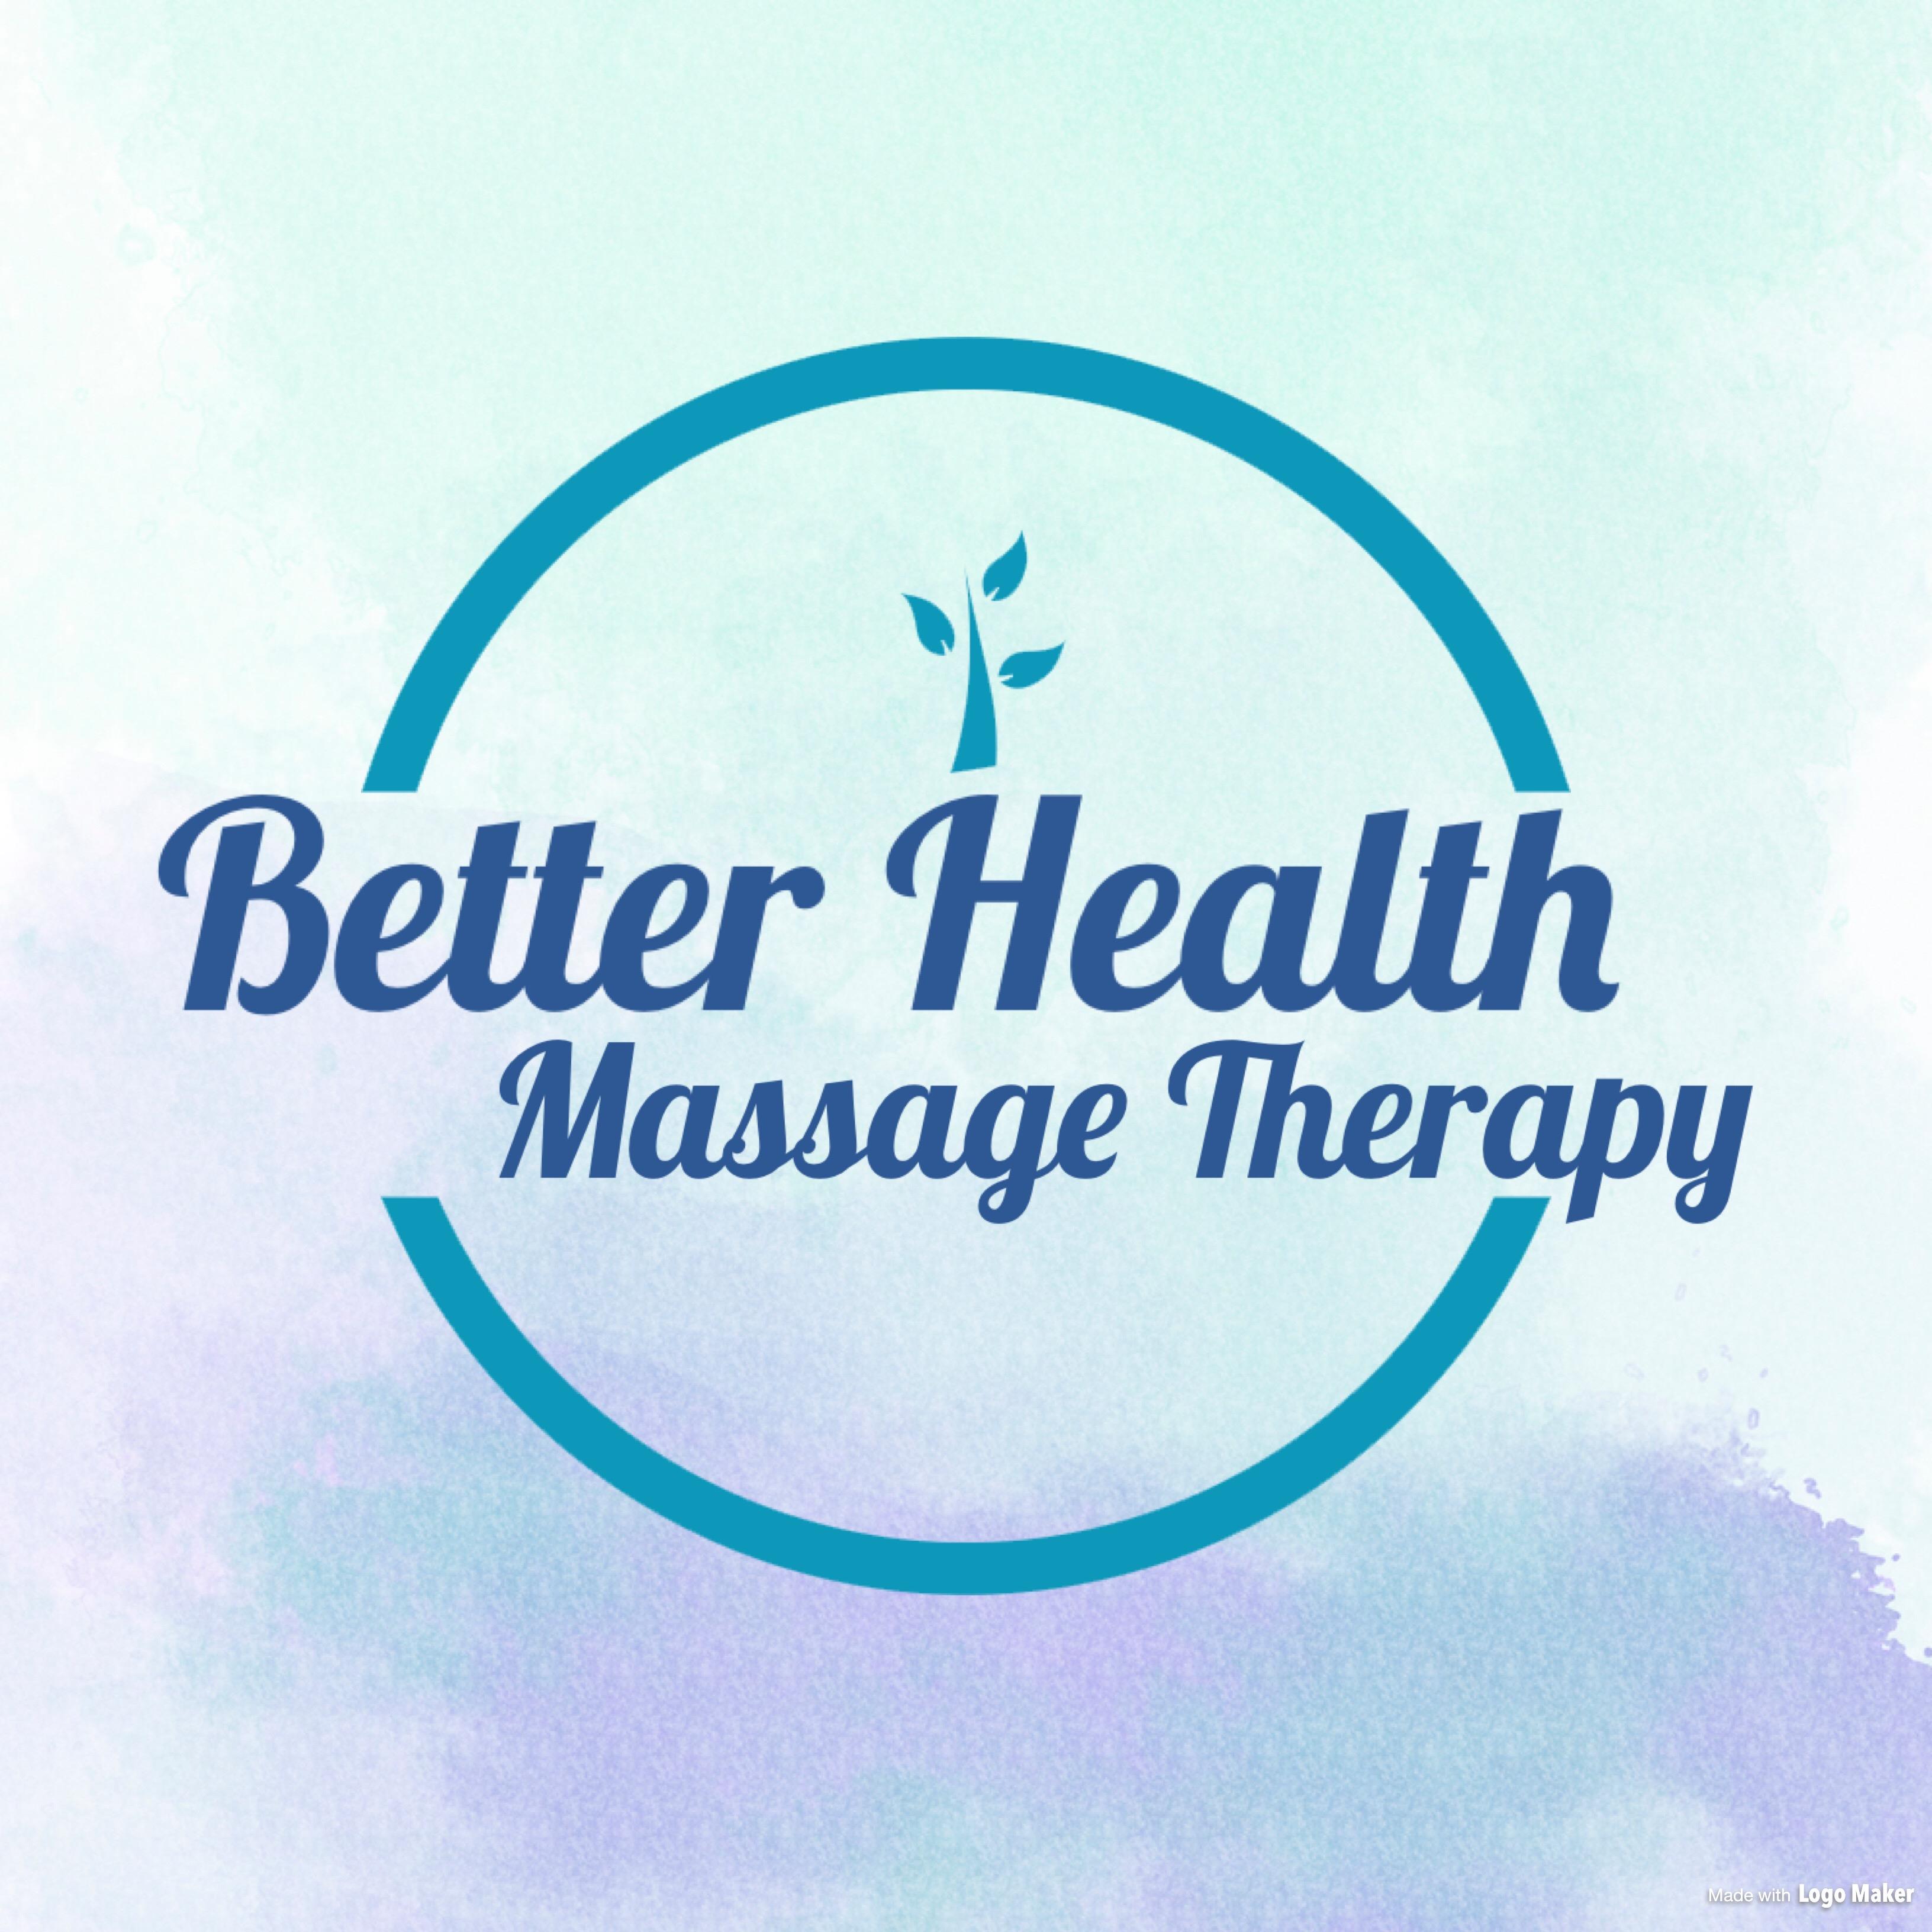 Better Health Massage Therapy